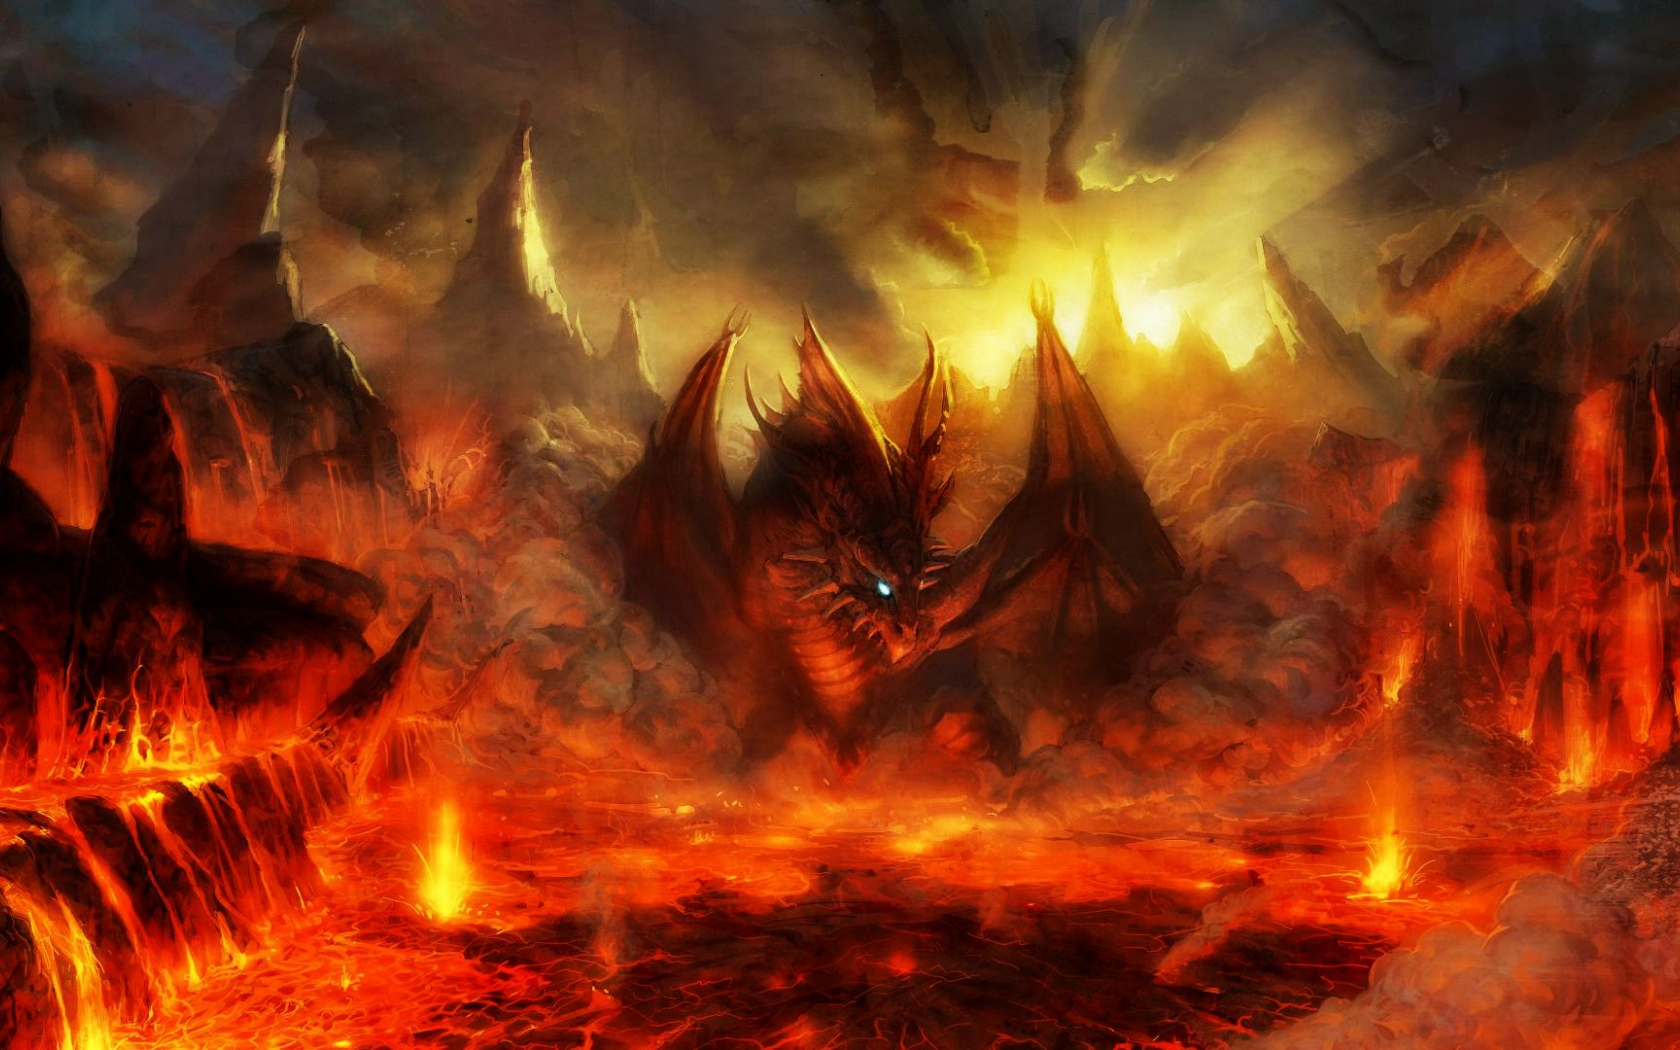 Free download Wallpaper Dragon in the flame of hell 1920x1080 wallpaper [1920x1080] for your Desktop, Mobile & Tablet. Explore Hell Wallpaper. Hell Girl Wallpaper, Hell Wallpaper HD, Gates of Hell Wallpaper